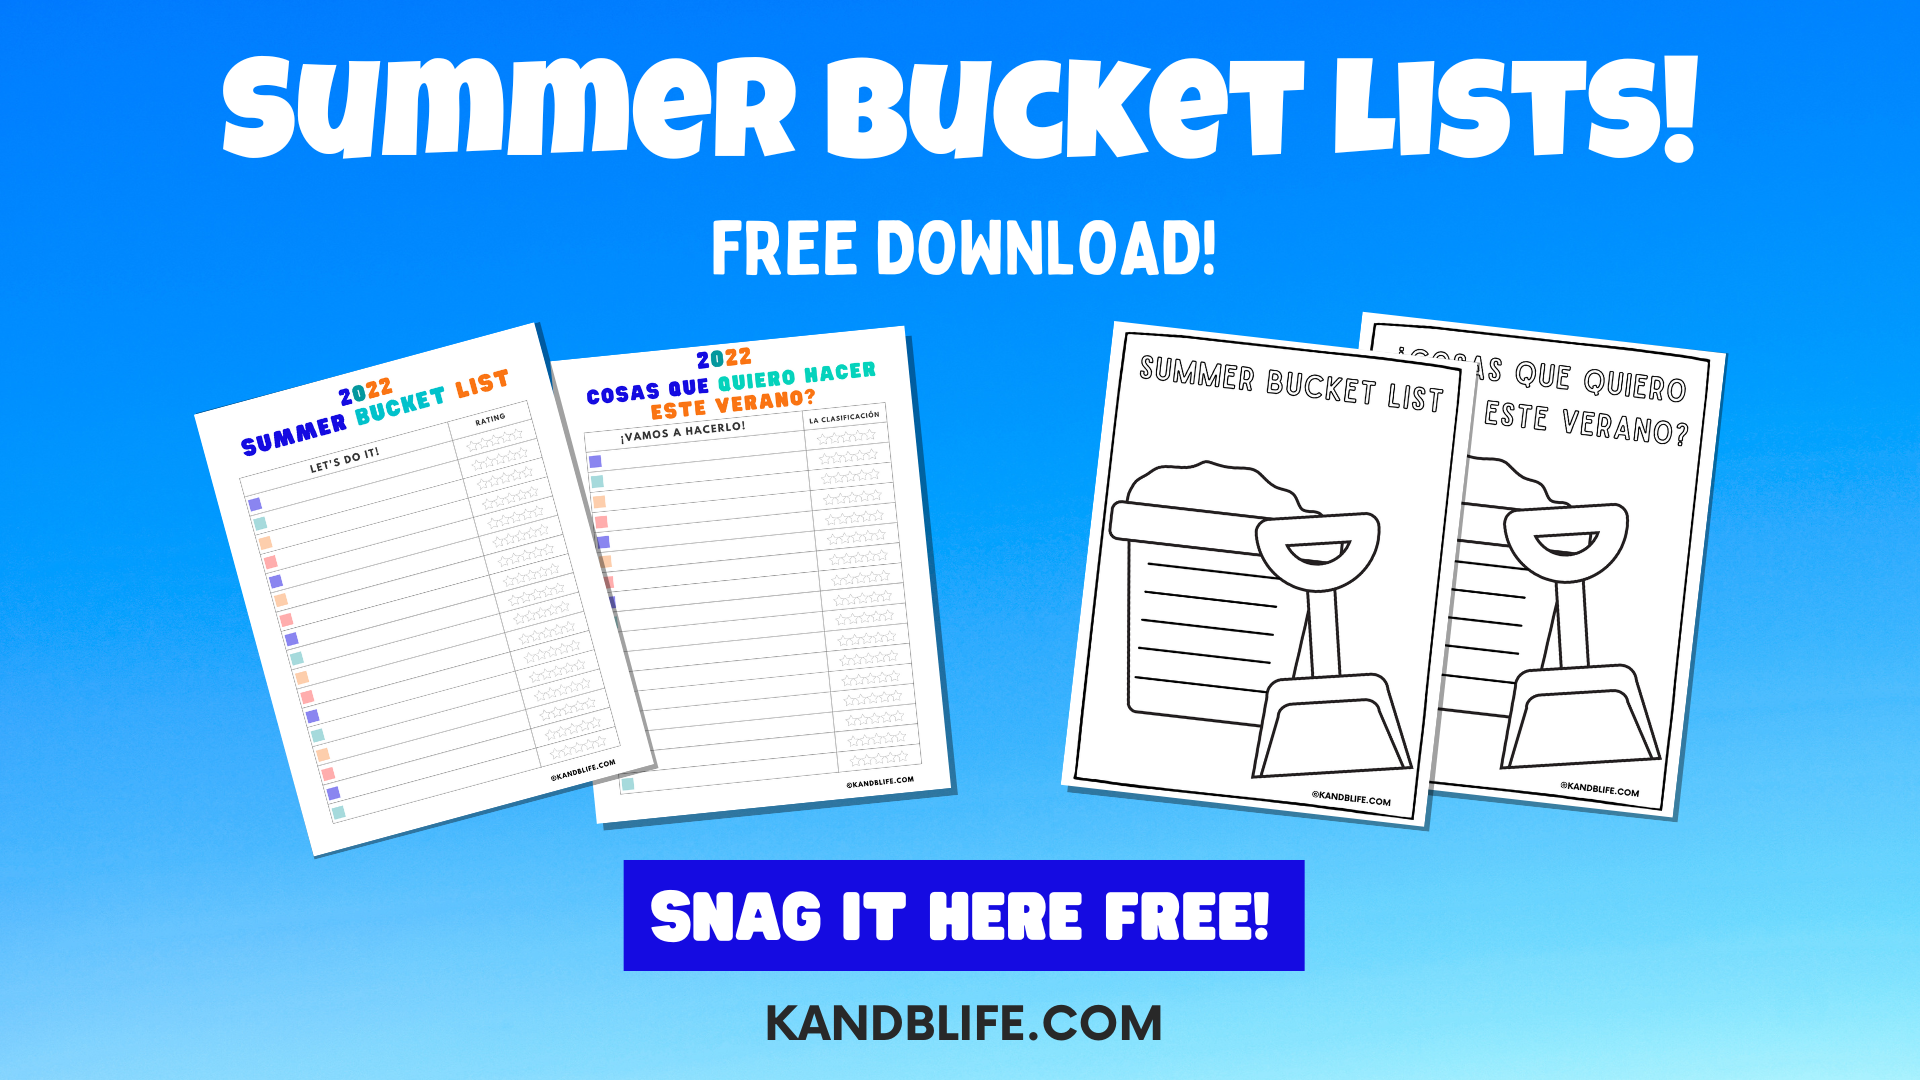 Summer Bucket List in Spanish and English!